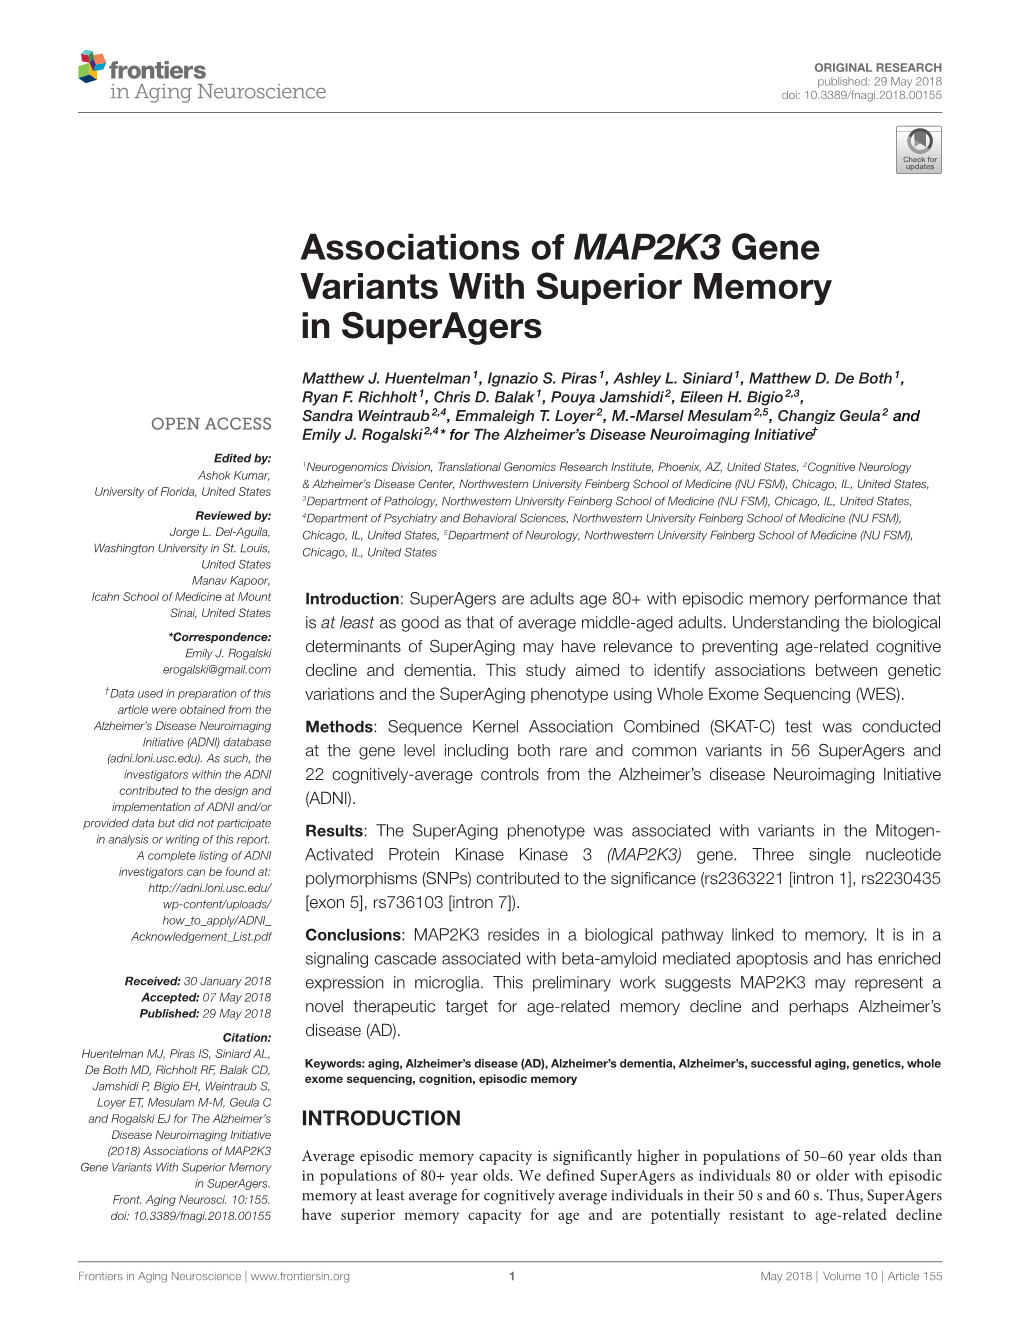 Associations of MAP2K3 Gene Variants with Superior Memory in Superagers